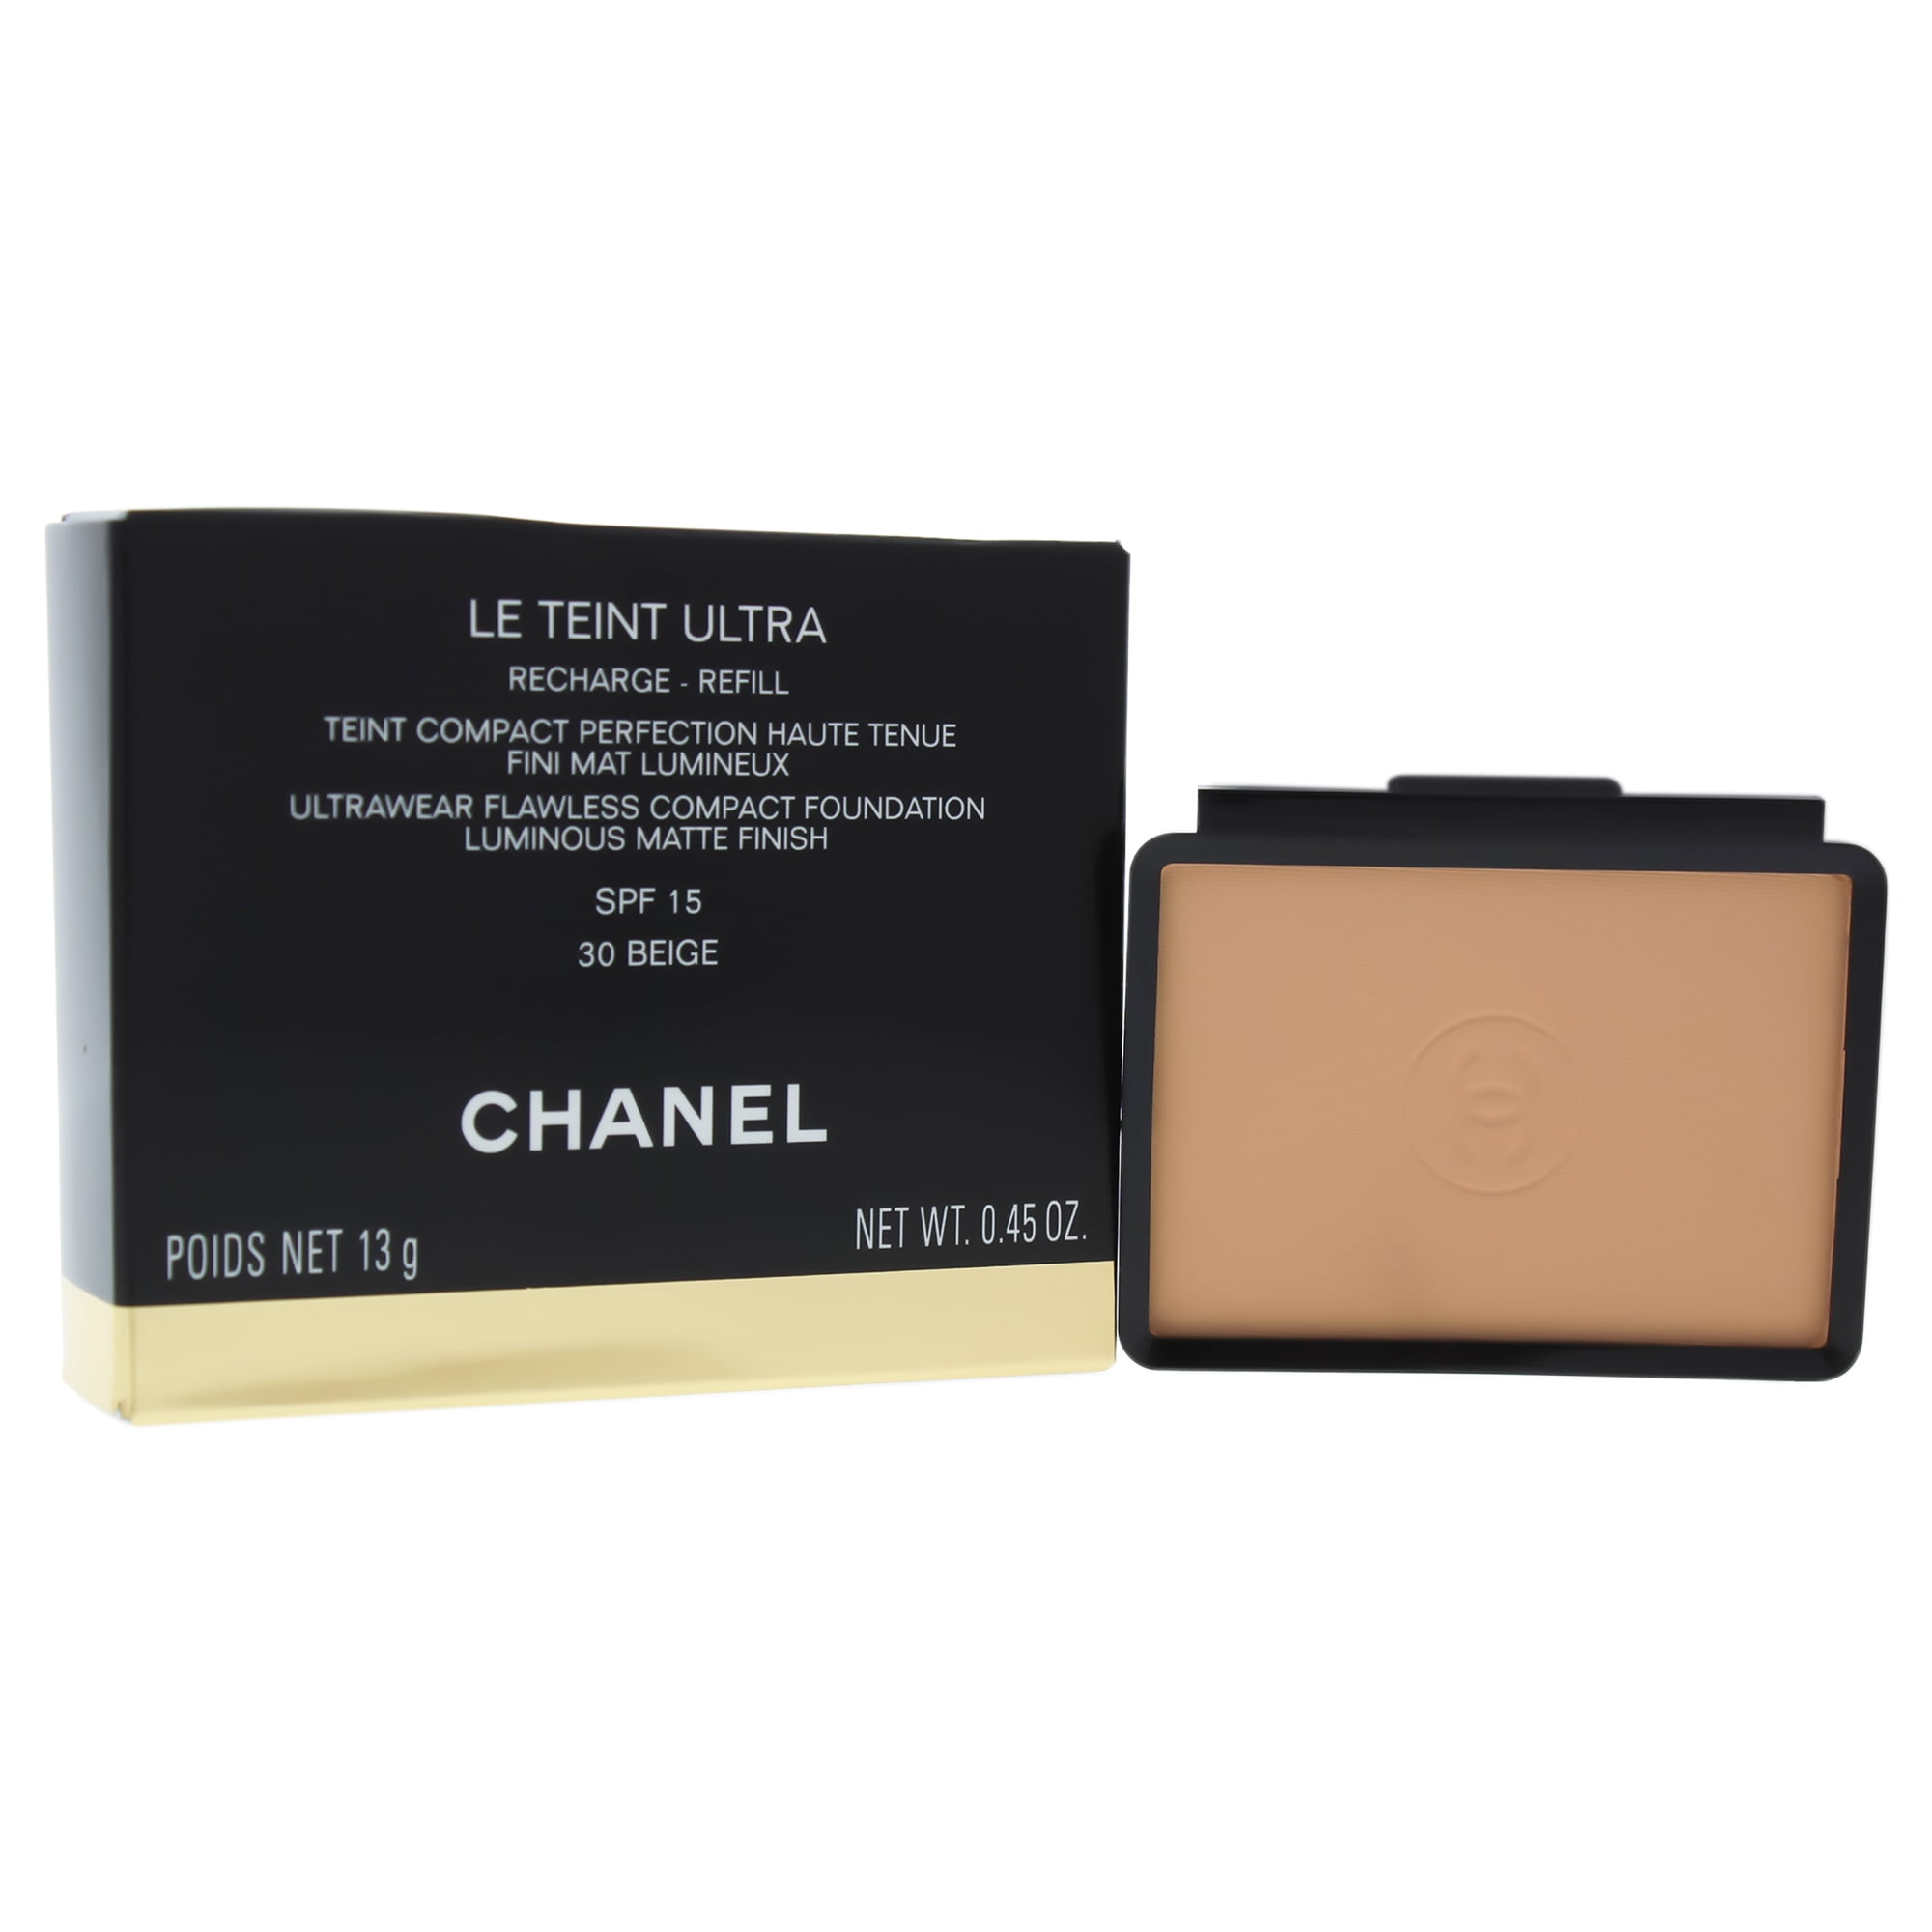 How to Use CHANEL's New Ultrawear Flawless Liquid and Compact